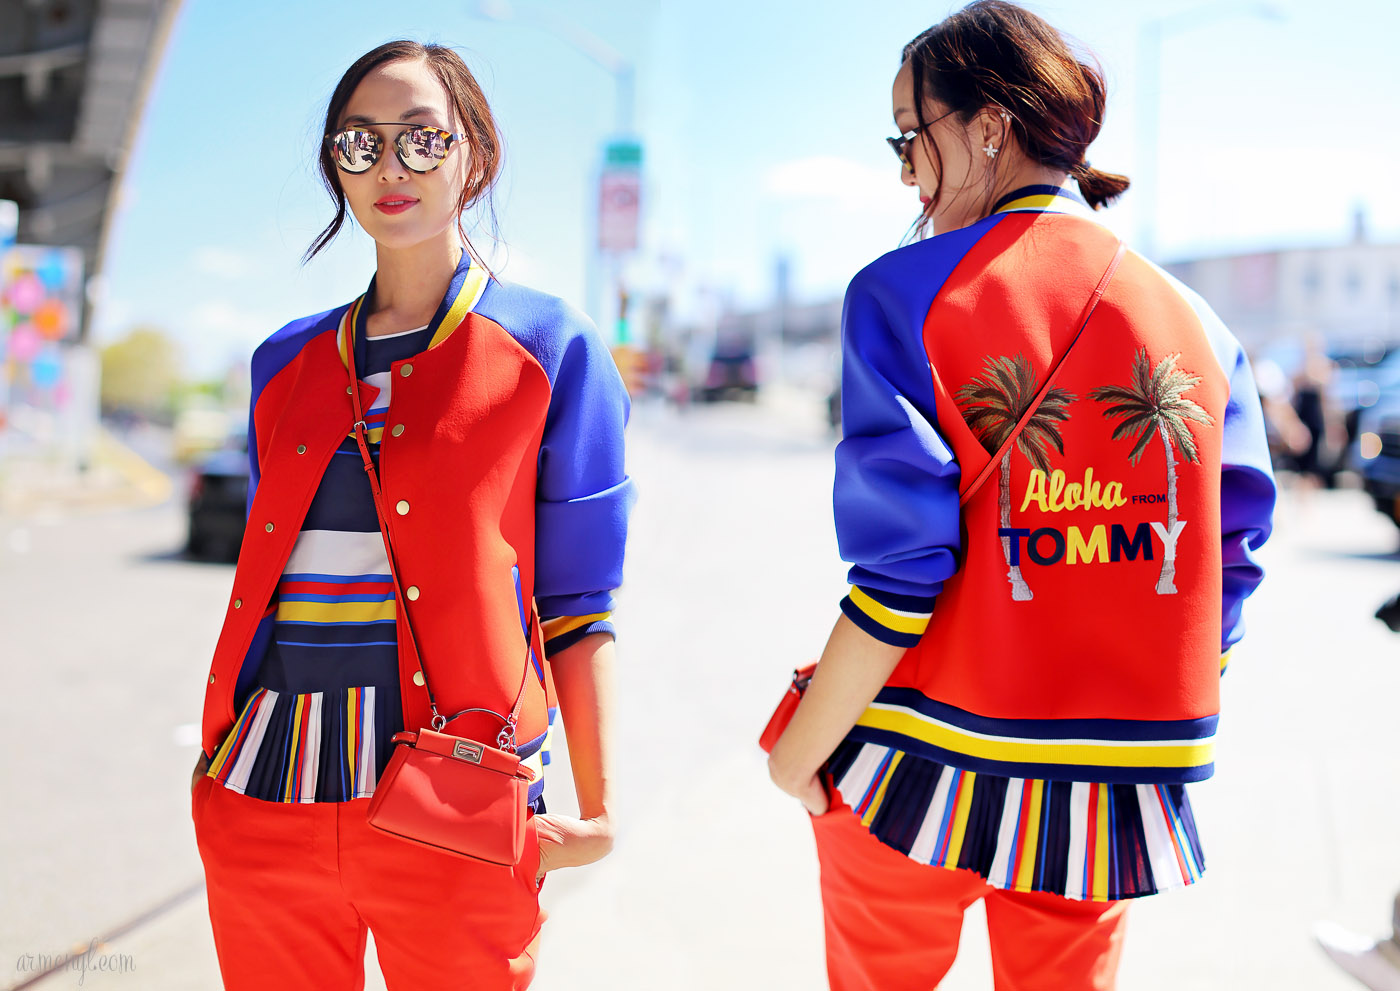 Chriselle Lim of the Christelle Factor in Full Tommy Hilfiger look and Tommy Hilfiger bomber jacket at Tommy Hilfiger Fashion Show in New York on September 2015